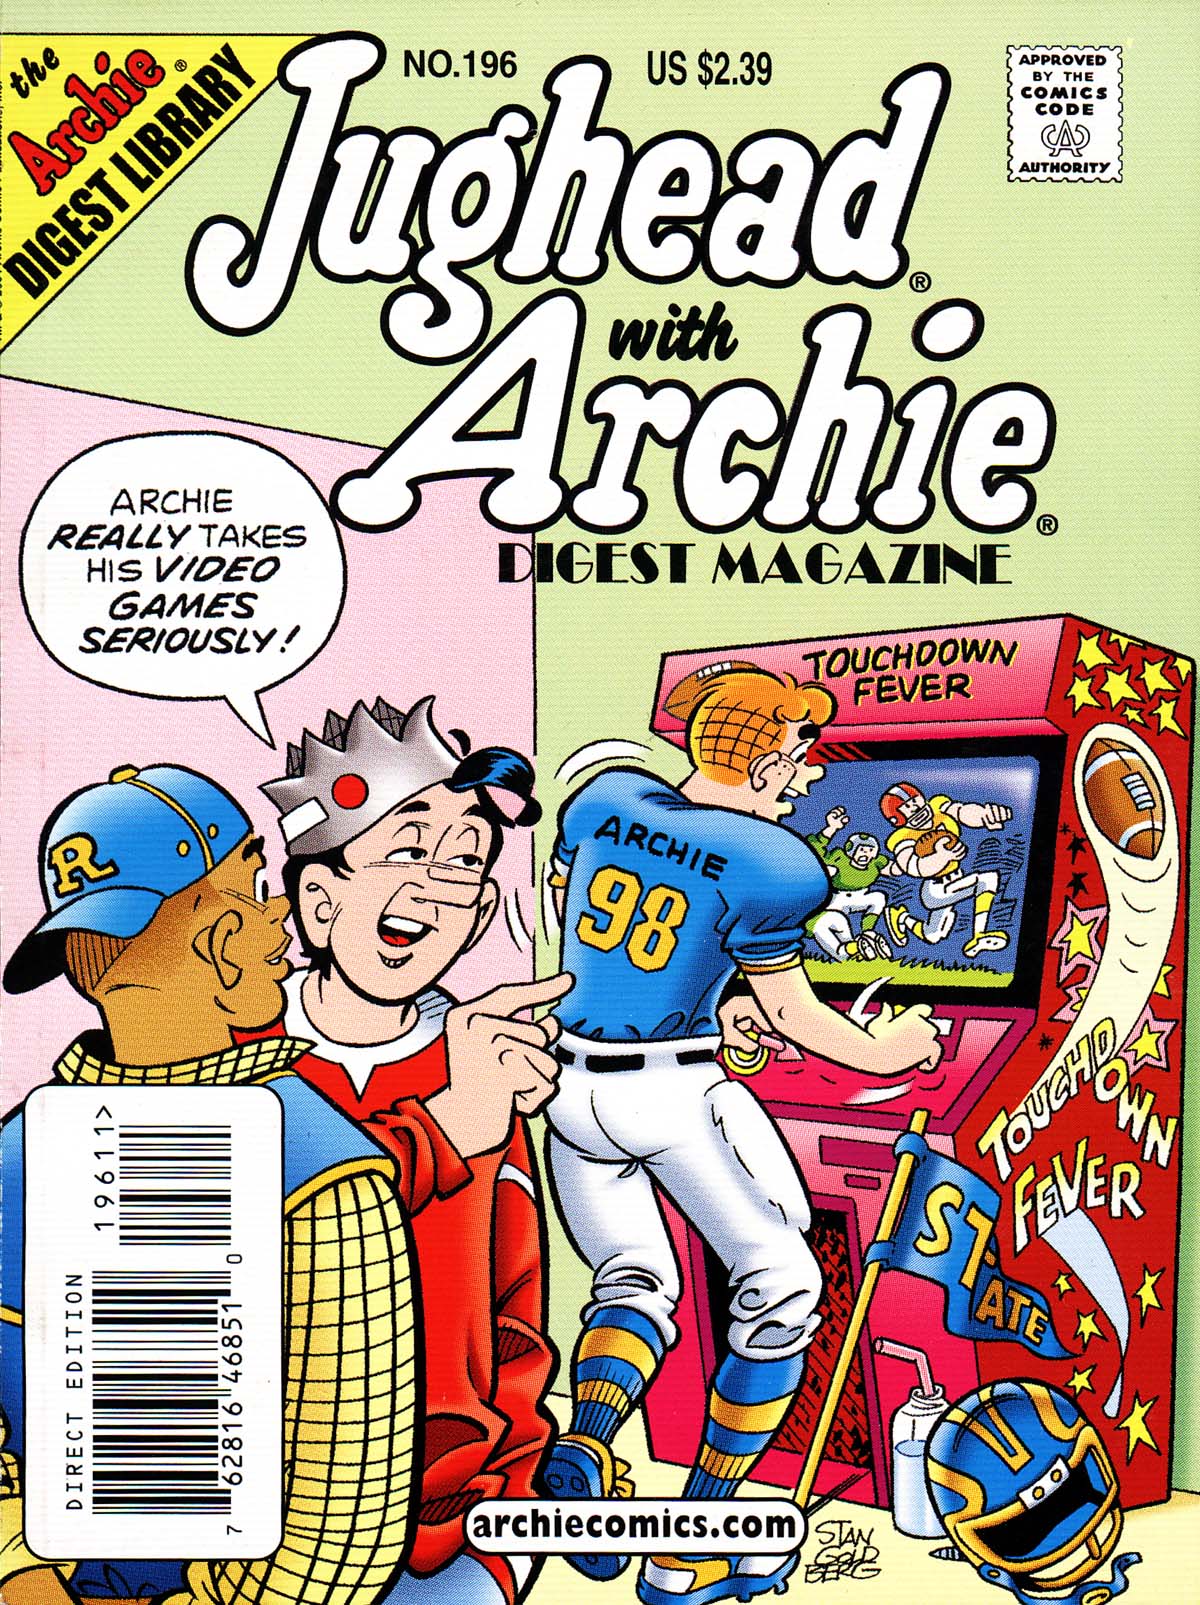 Read online Jughead with Archie Digest Magazine comic -  Issue #196 - 1